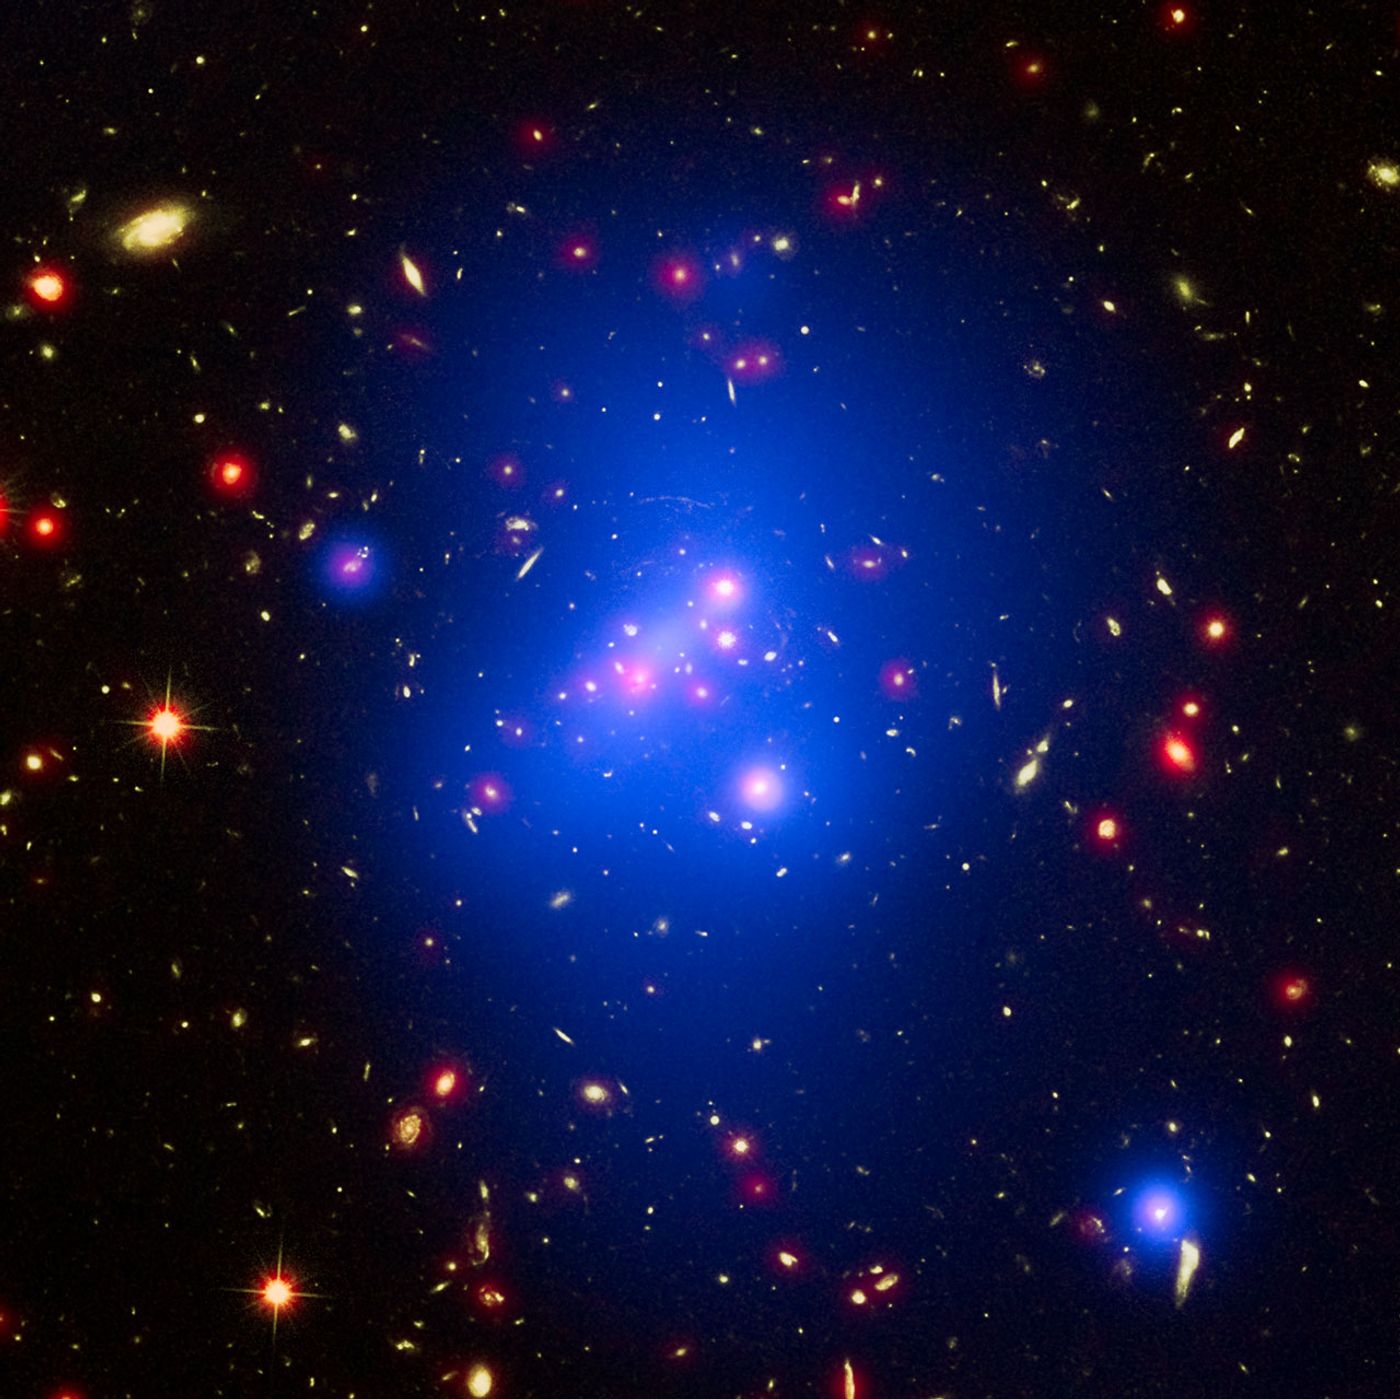 Galaxy clusters are exactly what they sound like; a group of galaxies that are bound together. Astronomers just recently found something very peculiar about iron presence on the outskirts of these clusters.